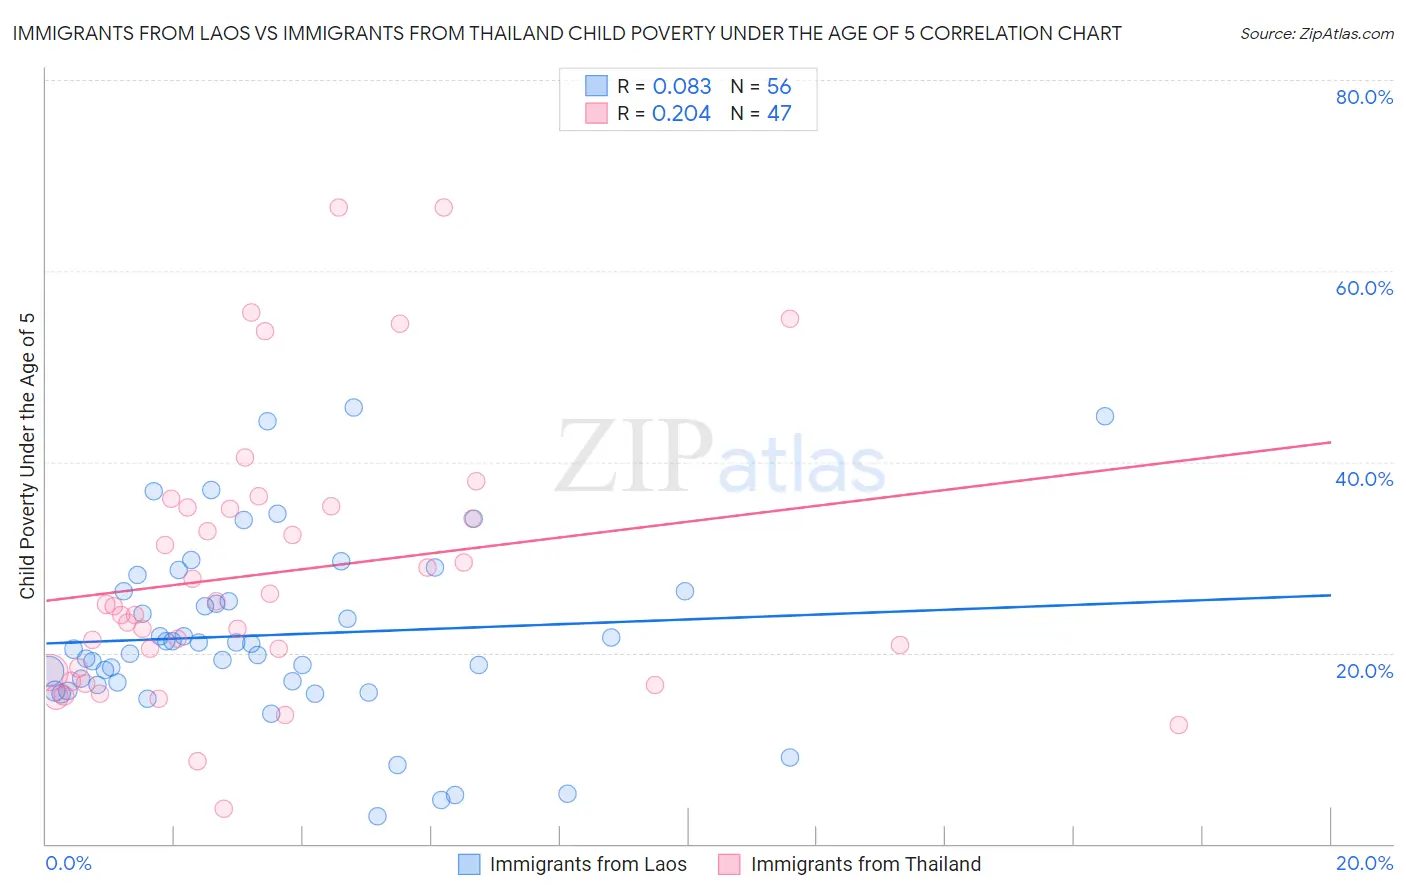 Immigrants from Laos vs Immigrants from Thailand Child Poverty Under the Age of 5